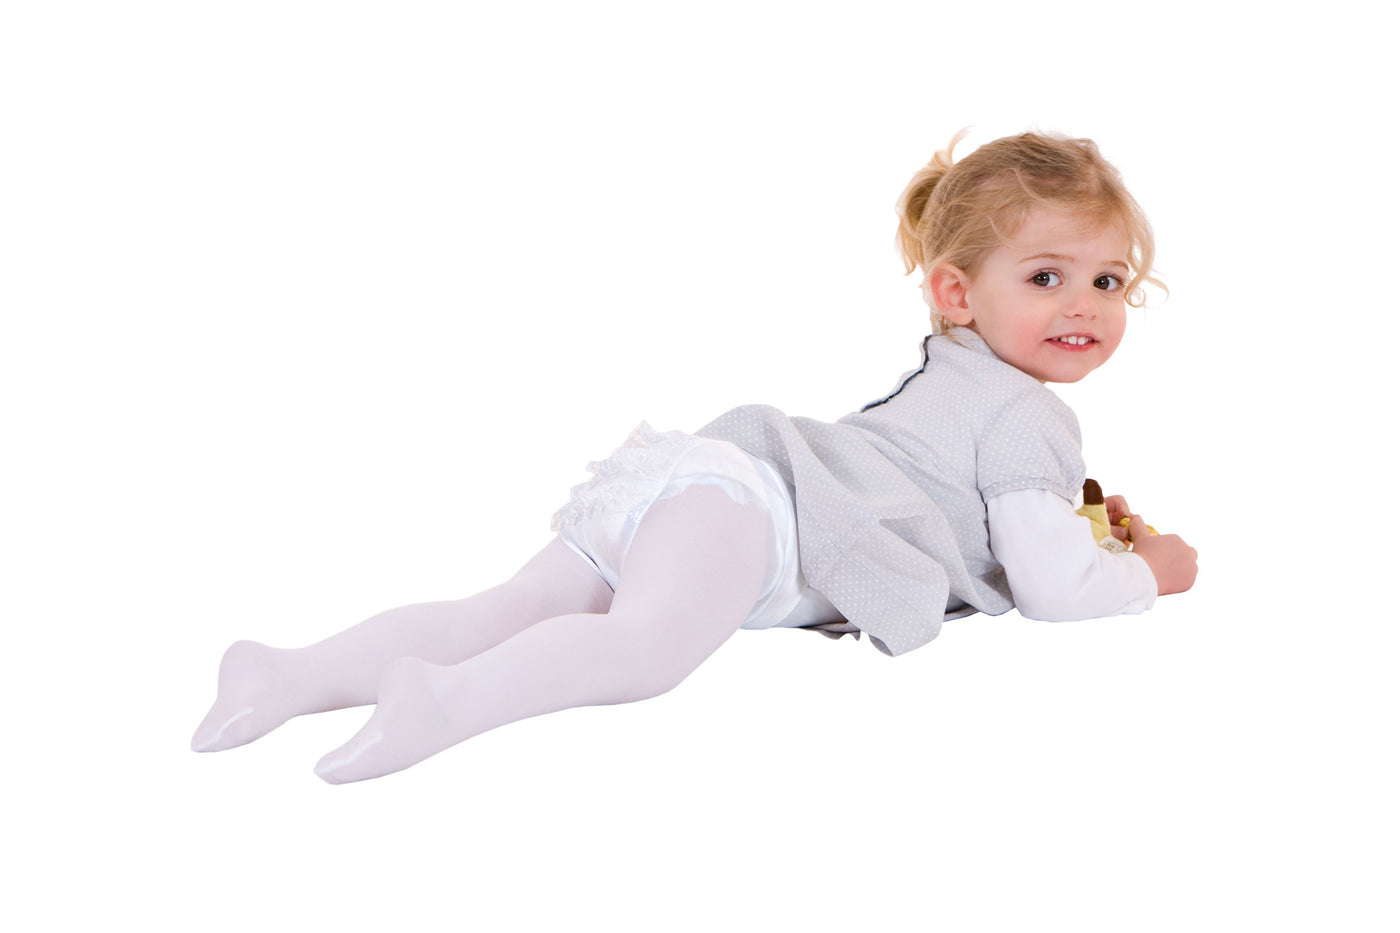 Smiling little girl wearing sport clothing standing in studio Stock Photo